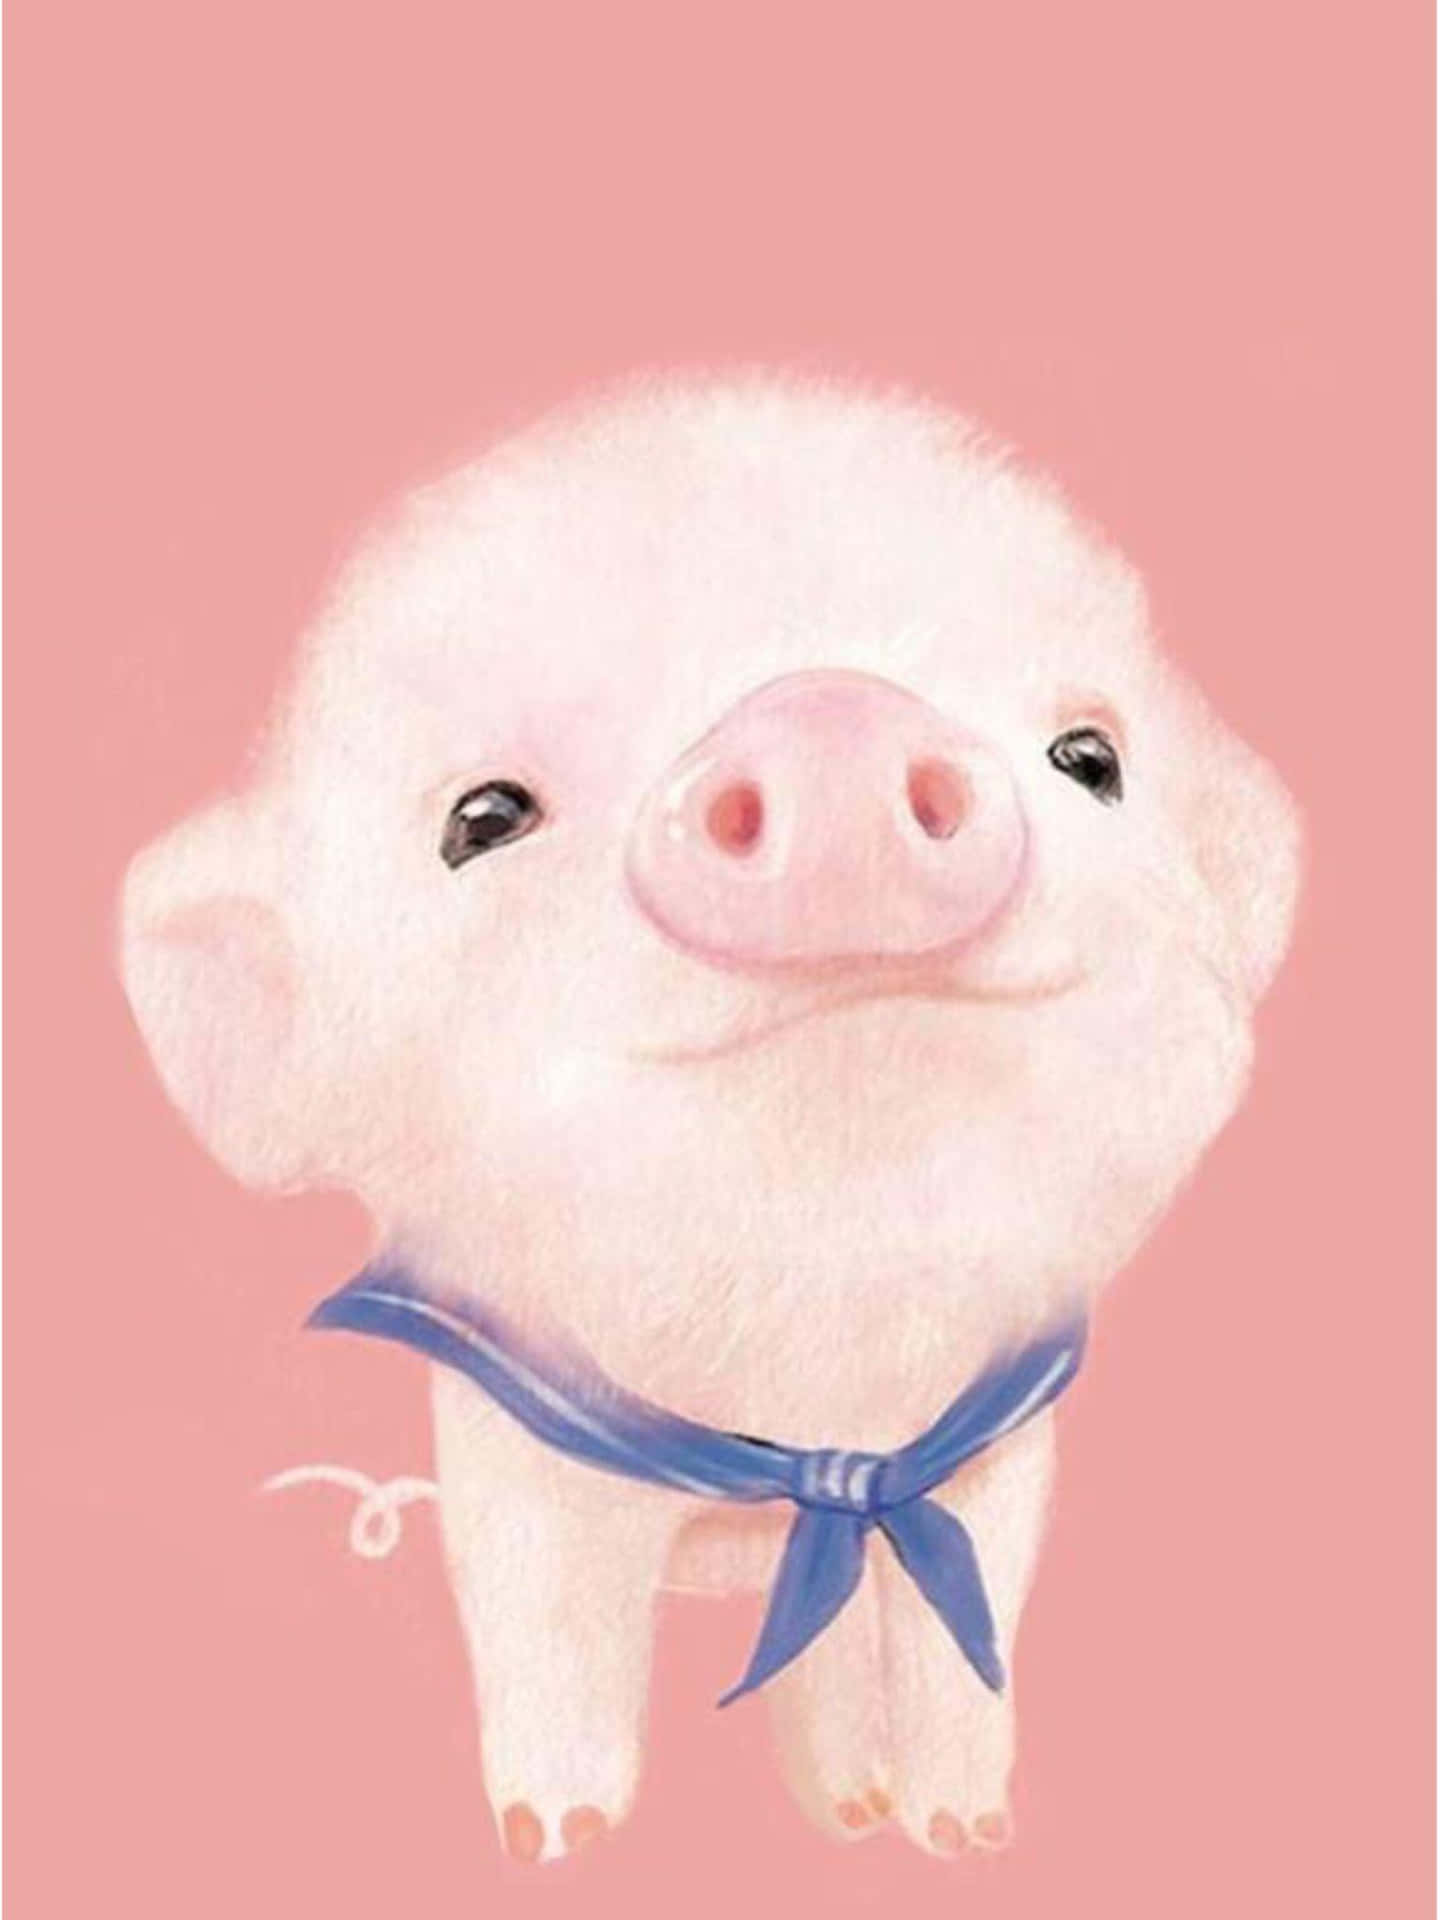 Don't forget to save with Piggy - the top smart finance app